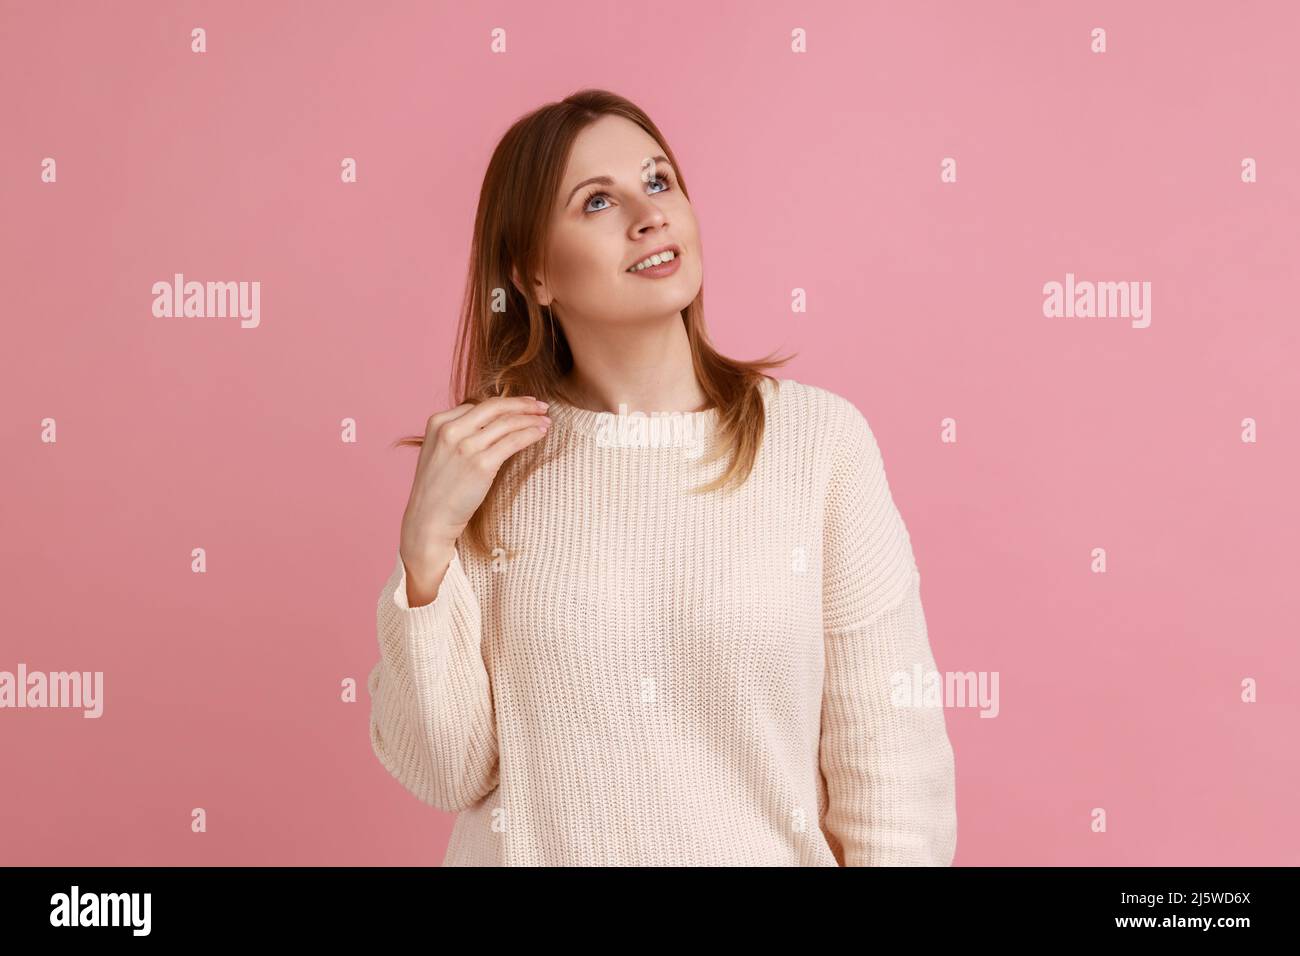 Portrait of blond woman touching hair while thinking, dreaming with joyous smiling face, pleasant fantasy, positive hopes, wearing white sweater. Indoor studio shot isolated on pink background. Stock Photo